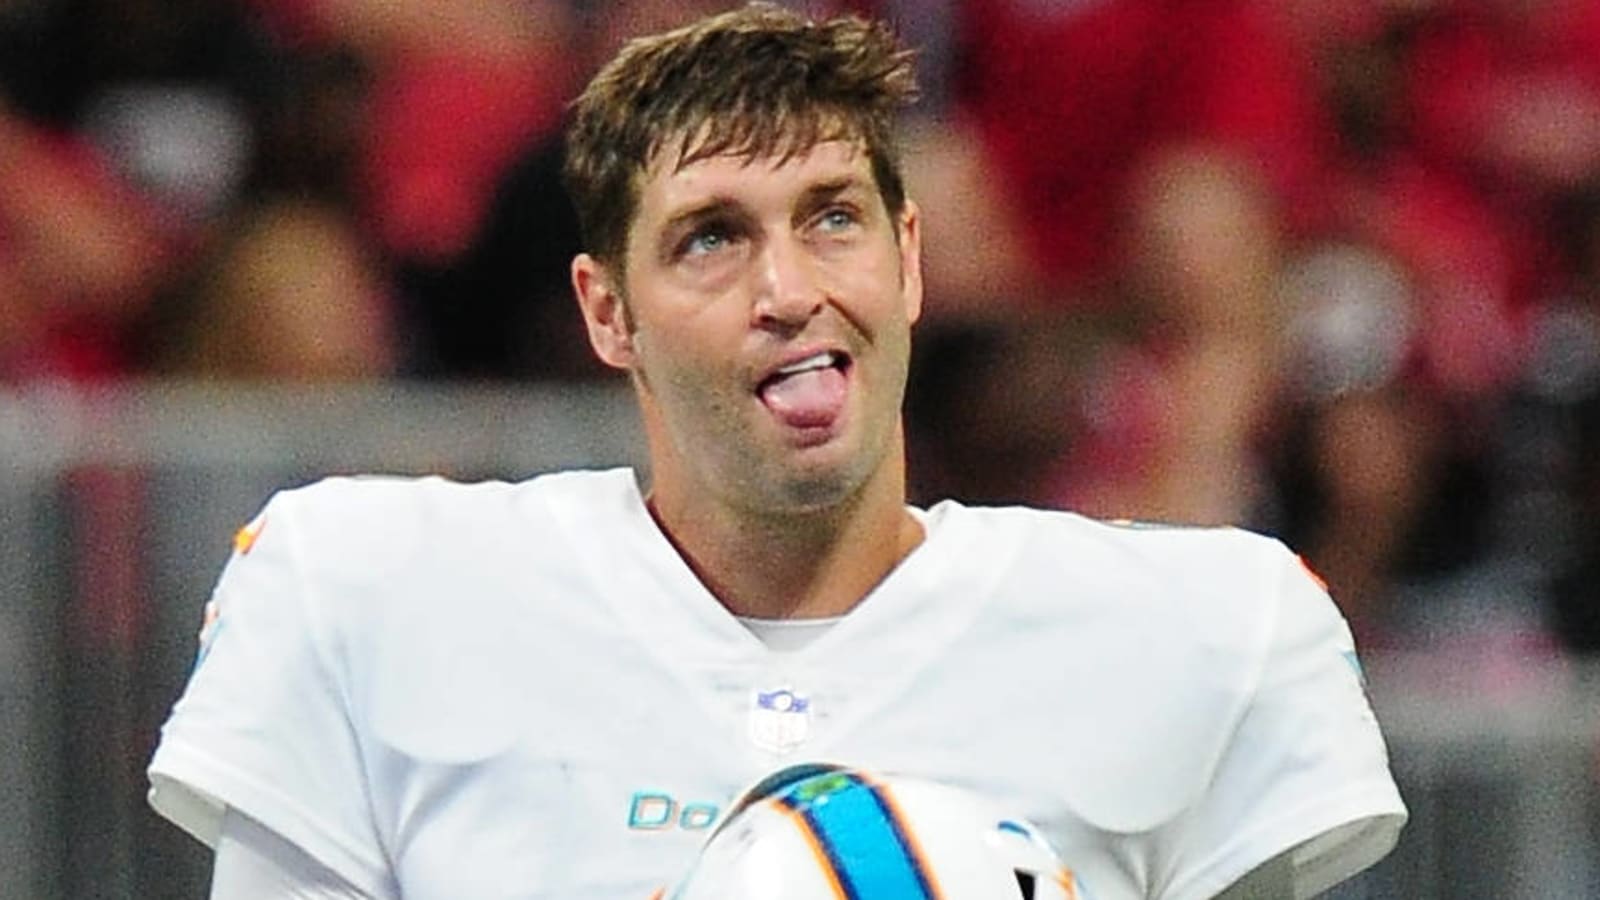 No one is celebrated for apathy like Jay Cutler 